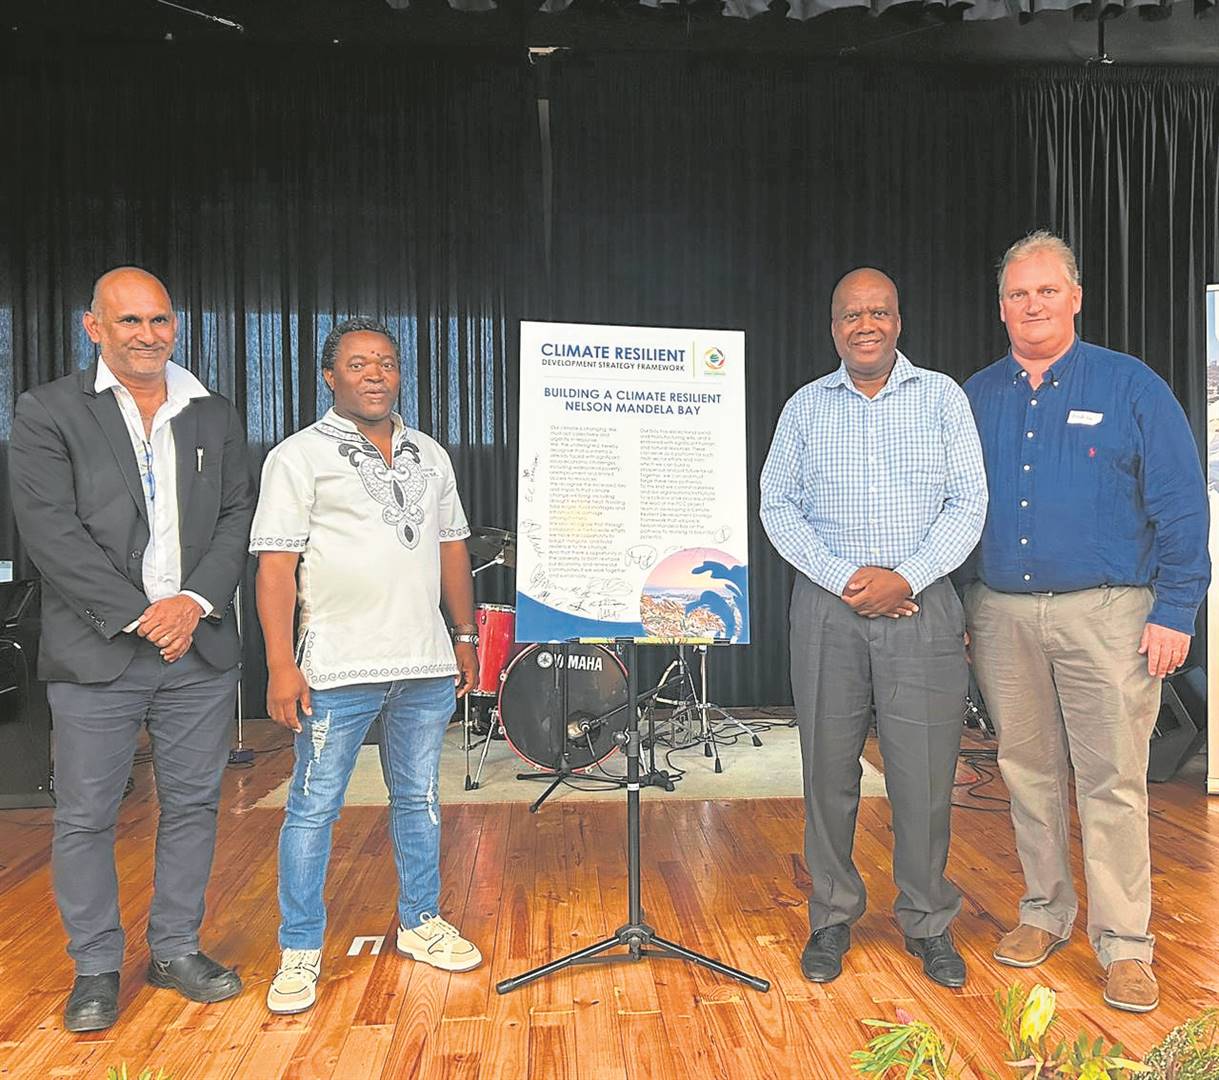 From left are Kelvin Naidoo (Chamber deputy president), Monga Peter (NMB Civil Society Coalition chairperson), Loyiso Dotwana (Chamber president) and Dr Andrew Muir (Chamber’s Immediate past president), during the signing of the pledge to build a Climate Resilient City at the Mendi Arts Centre in New Brighton.                          